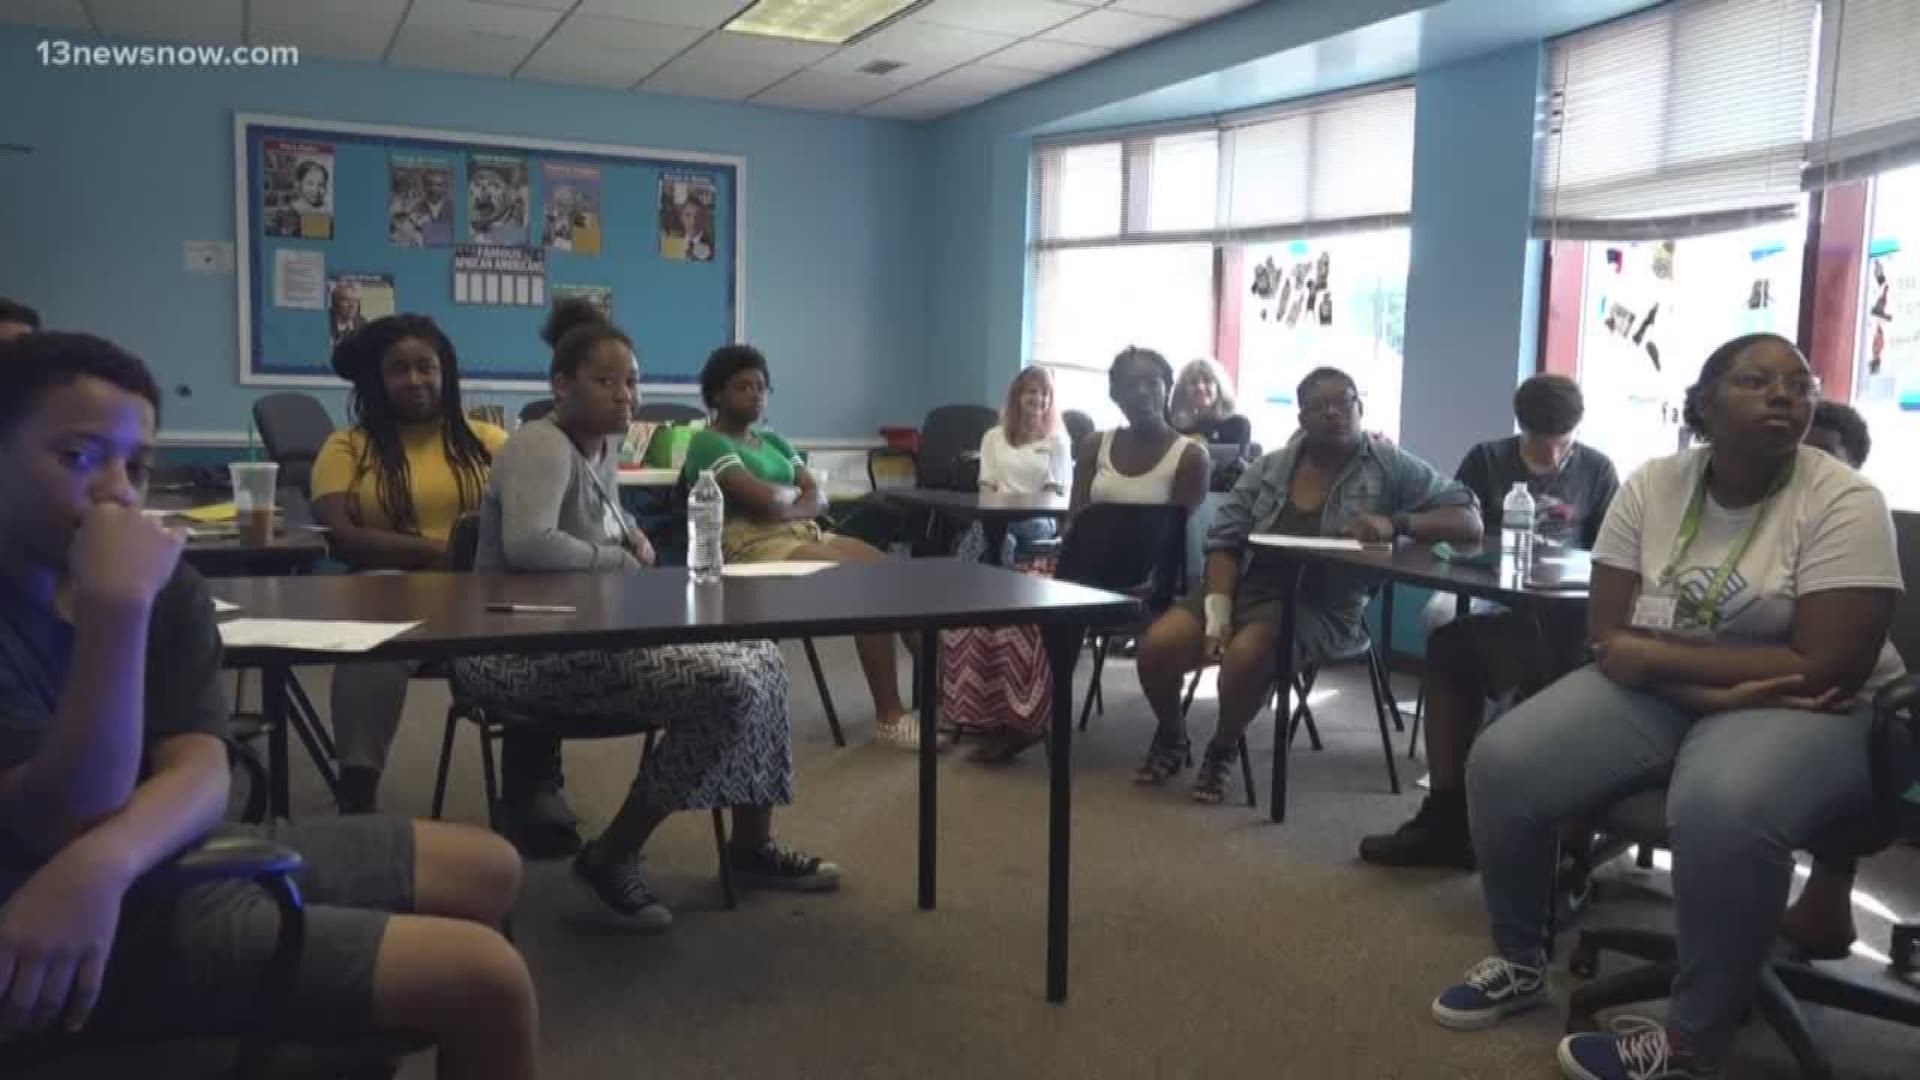 At Delegate Marcia Price's 'Our Future Matters' Camp, students learn about leadership skills, possible careers and how to make changes in their community.  The program lasts for two weeks.